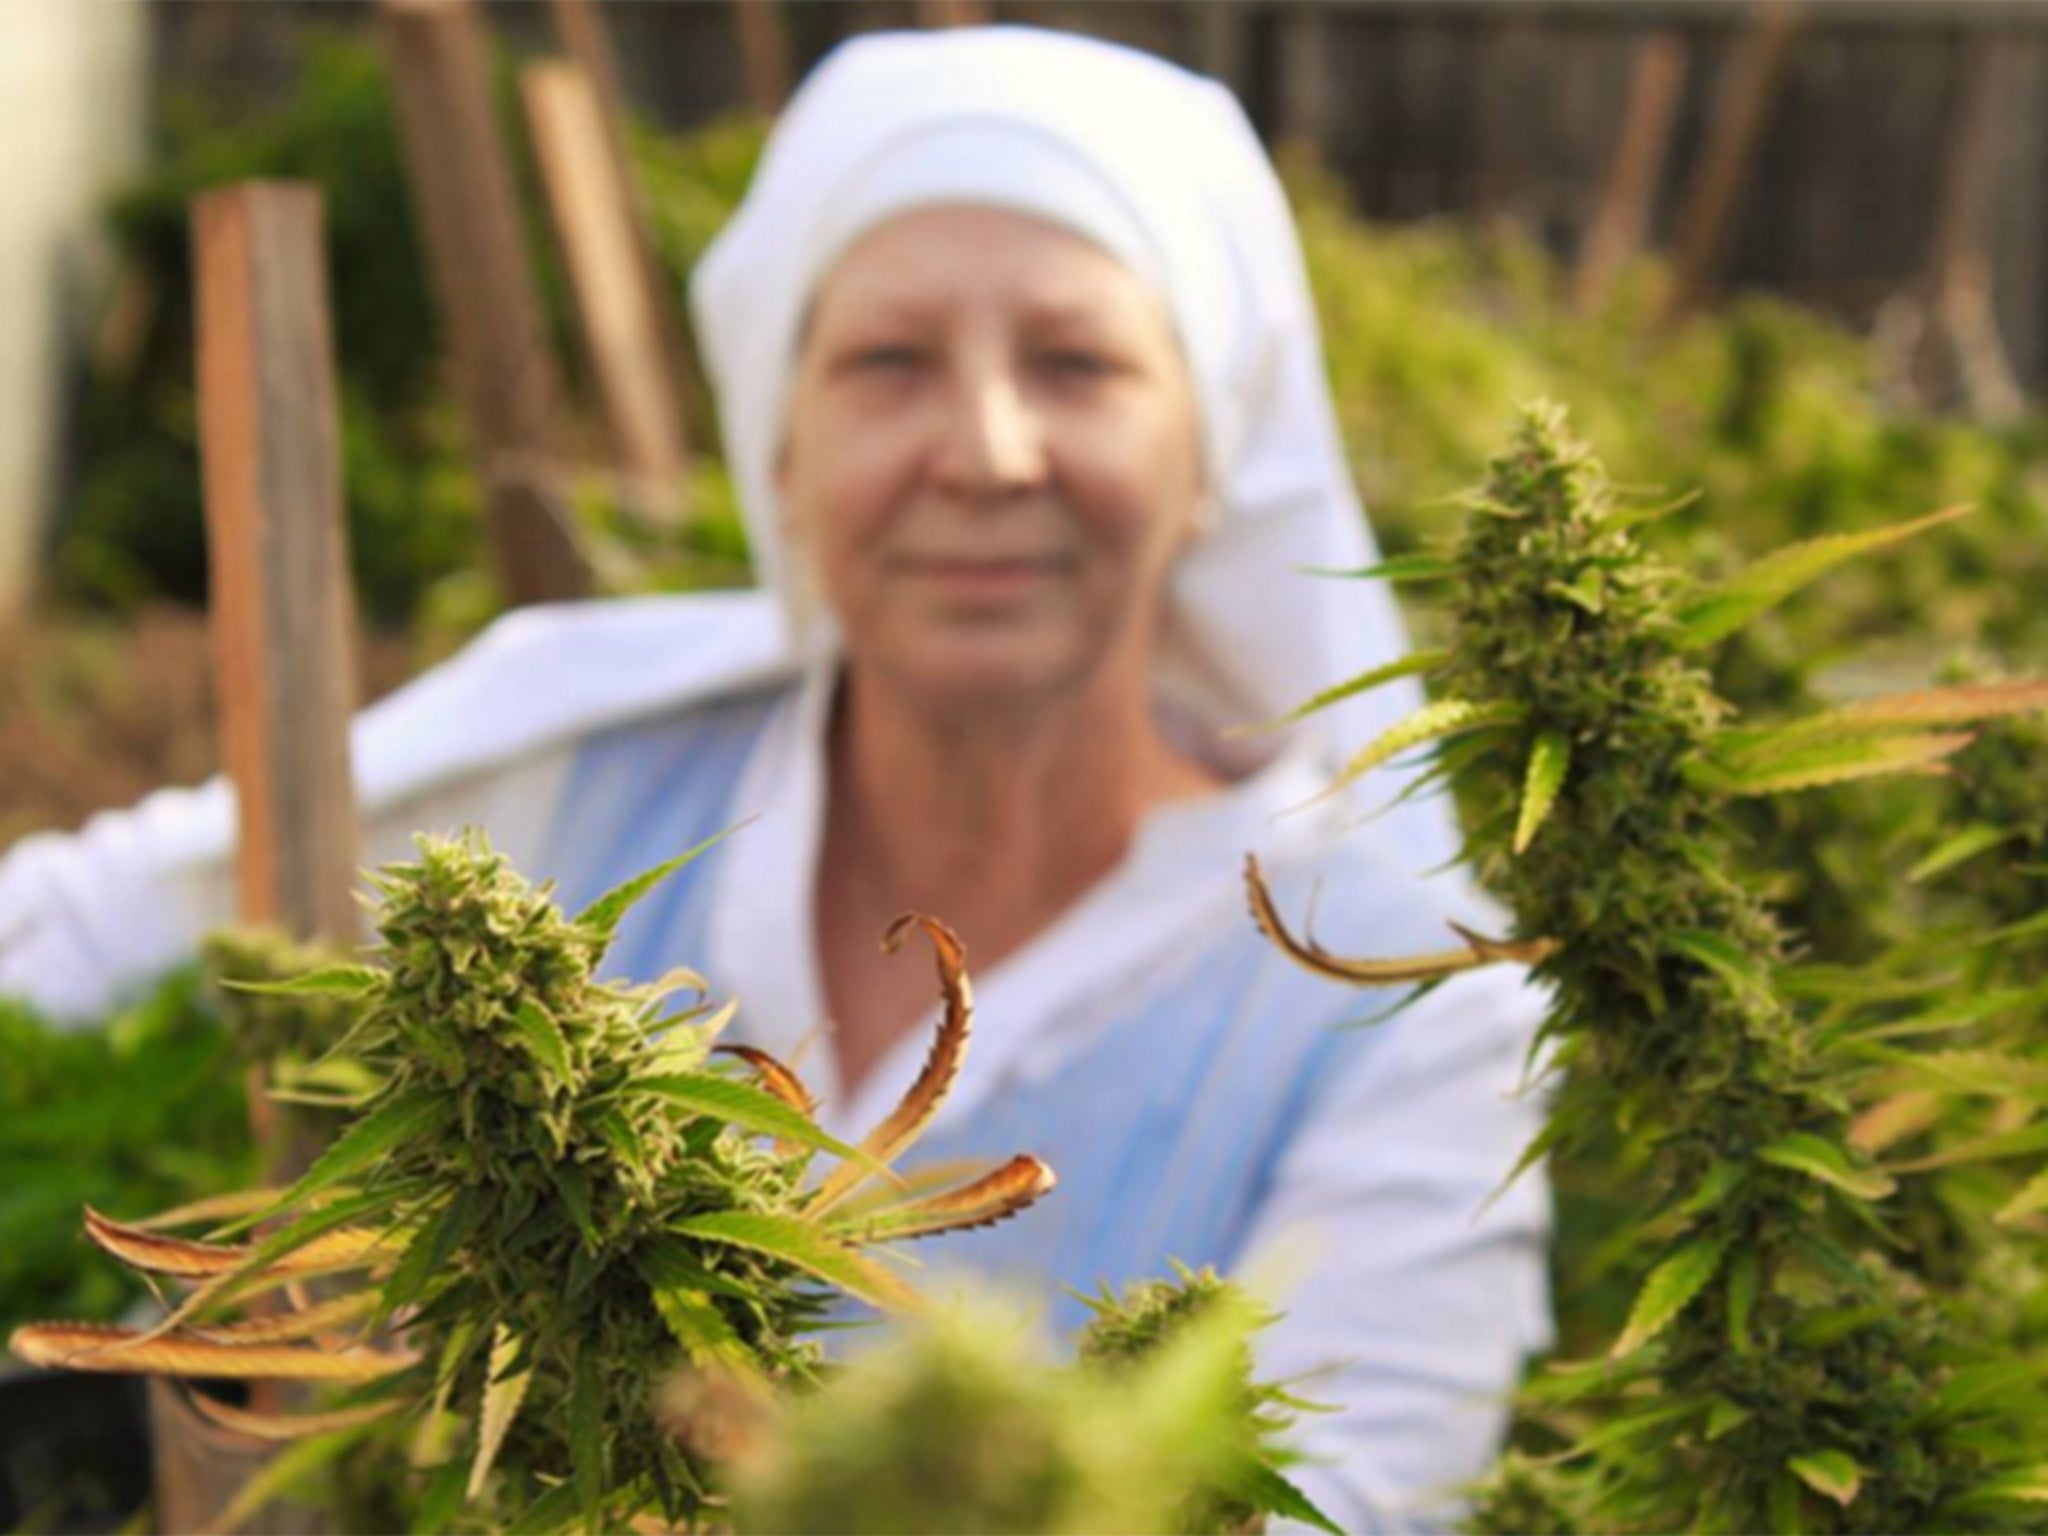 The nuns have been campaigning for the use of cannabis to be legalized in California